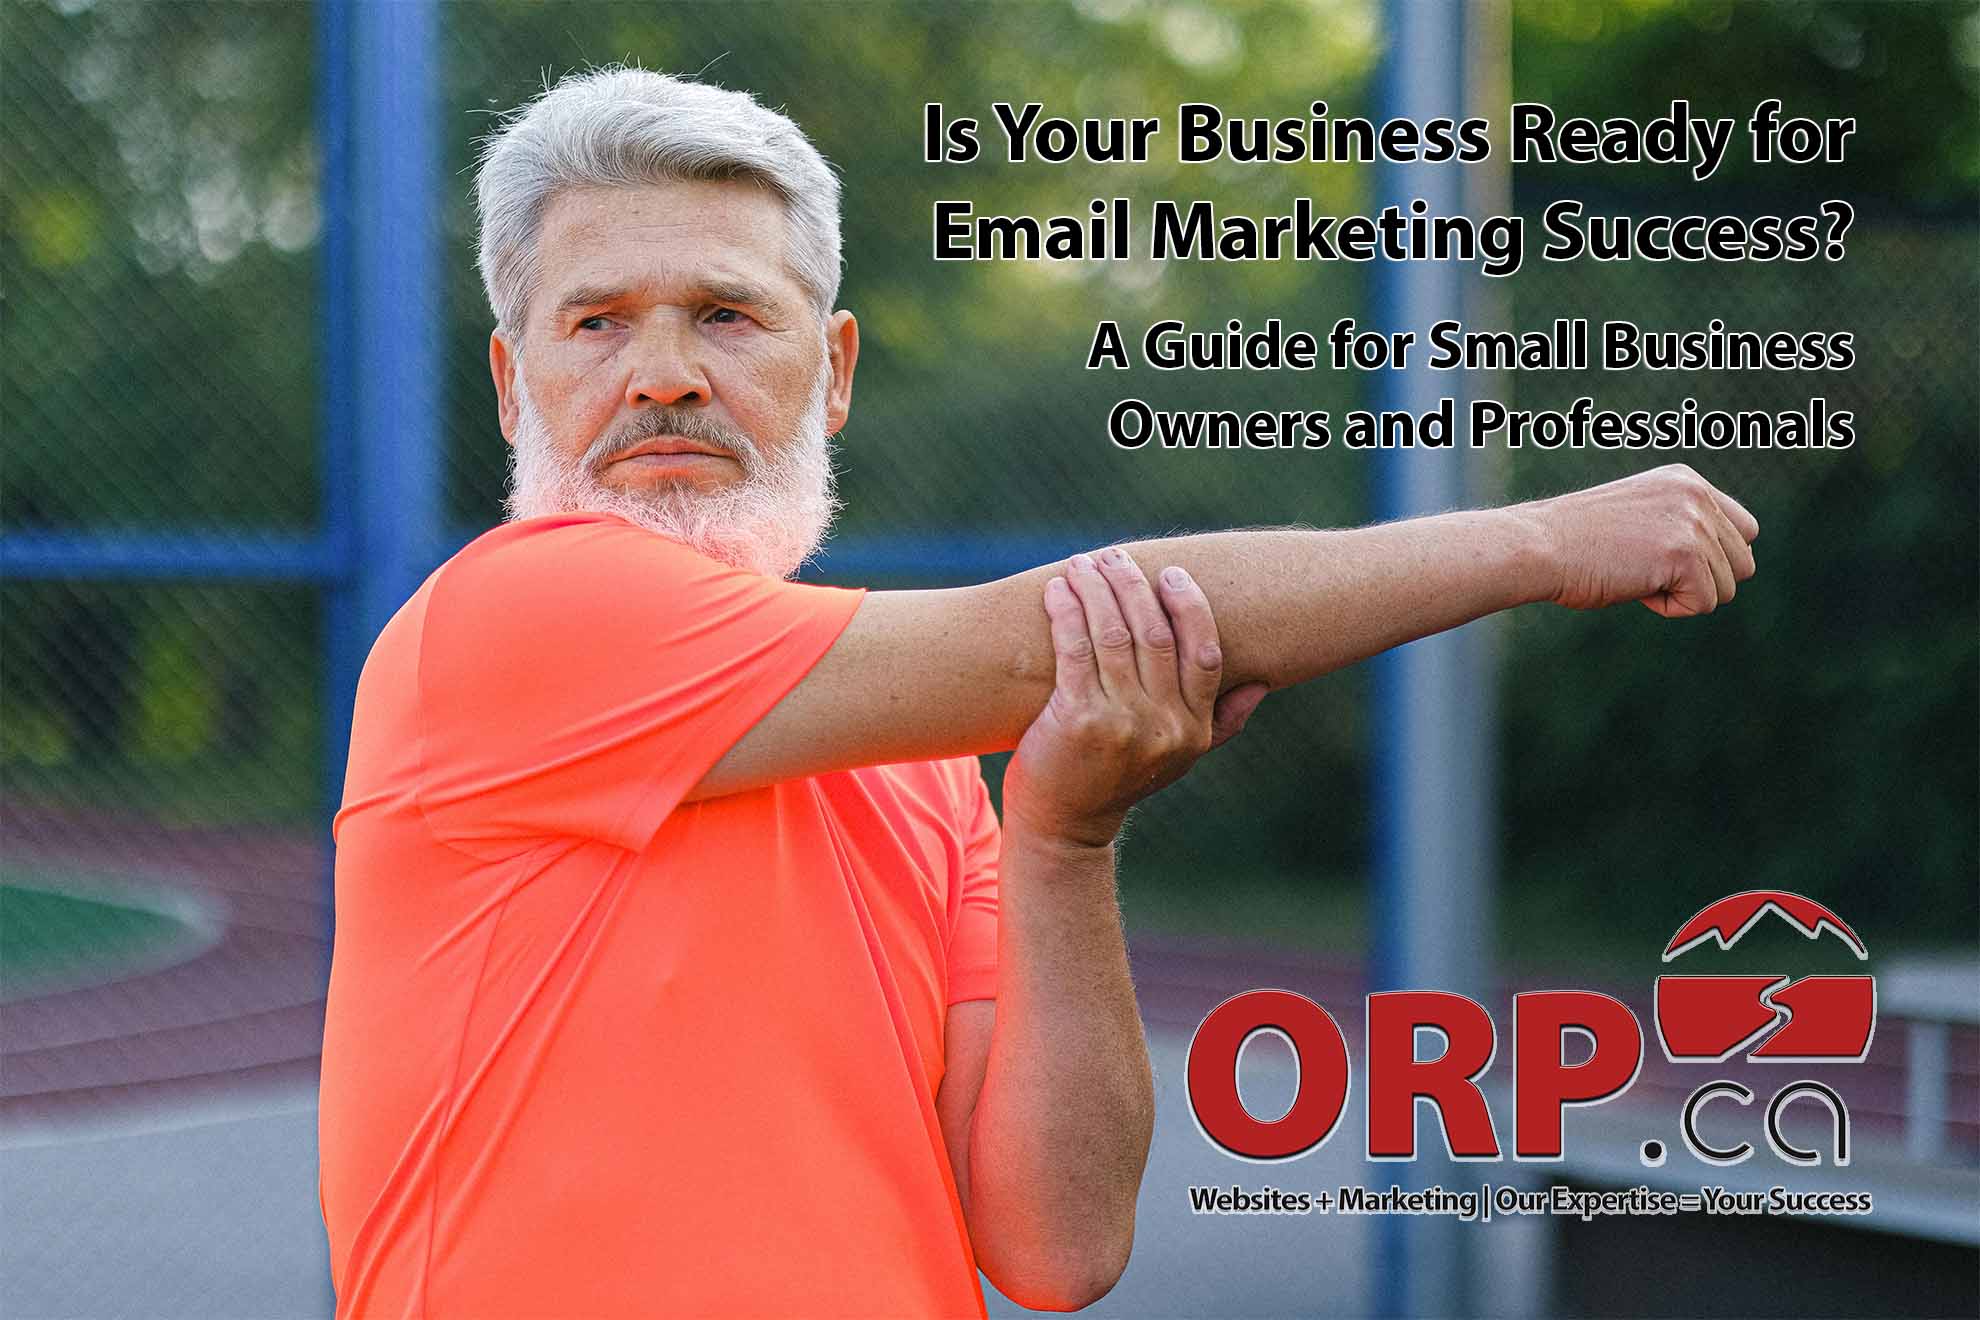 Is Your Business Ready for Email Marketing Success - A Digital Marketing article from ORP.ca Websites + Marketing | Our Expertise  = Your Success - Services for Small Business and Business Professionals"